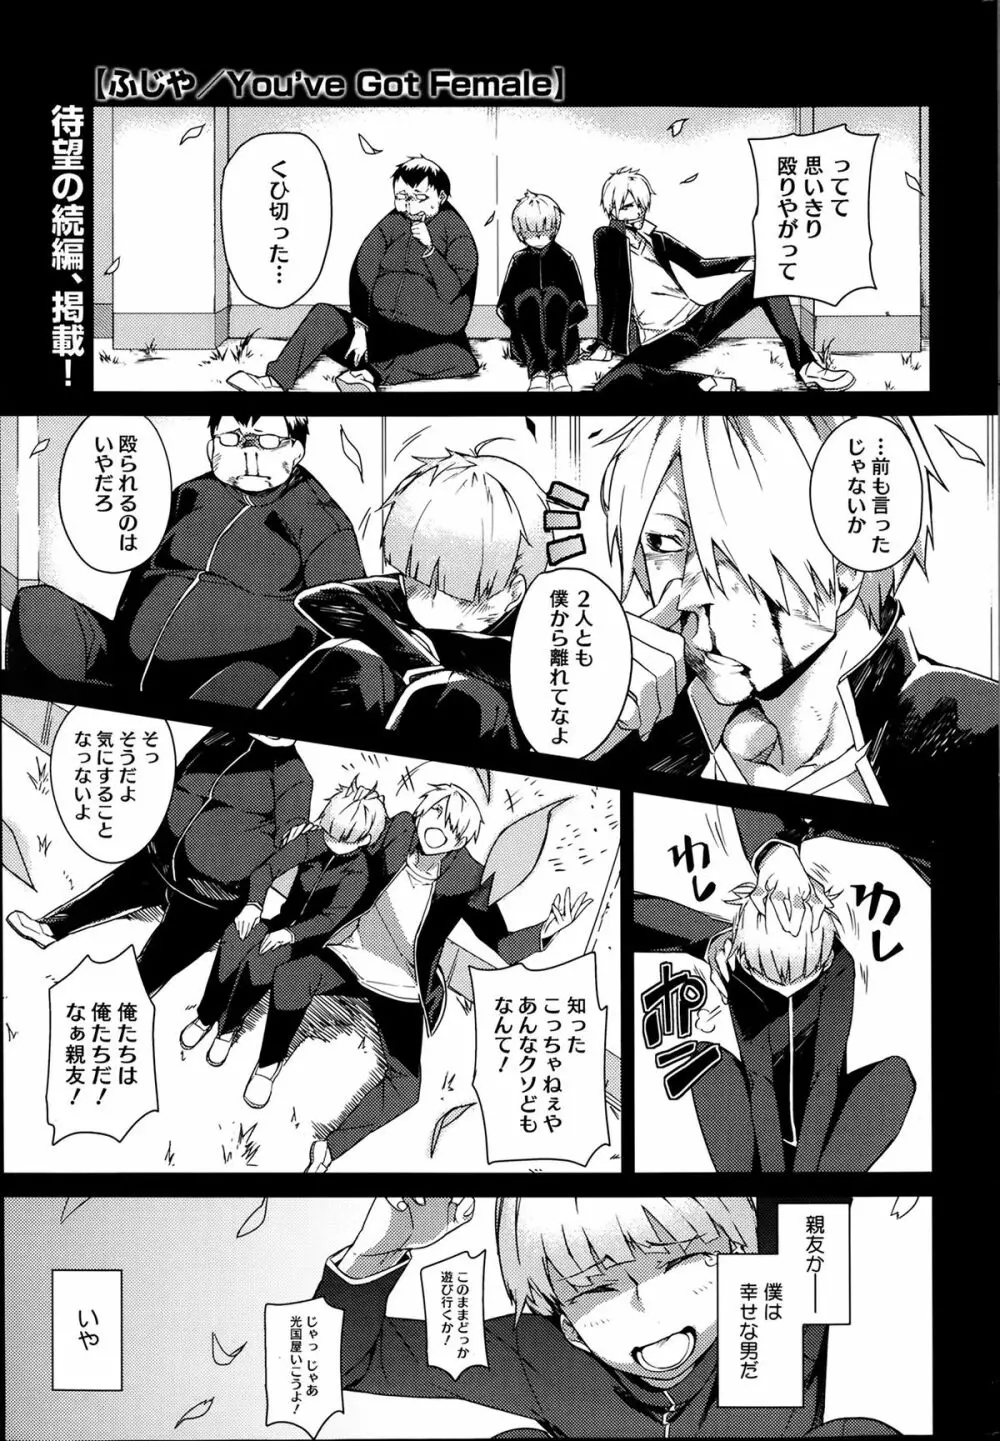 You've Got Female 第01-03話 Page.22